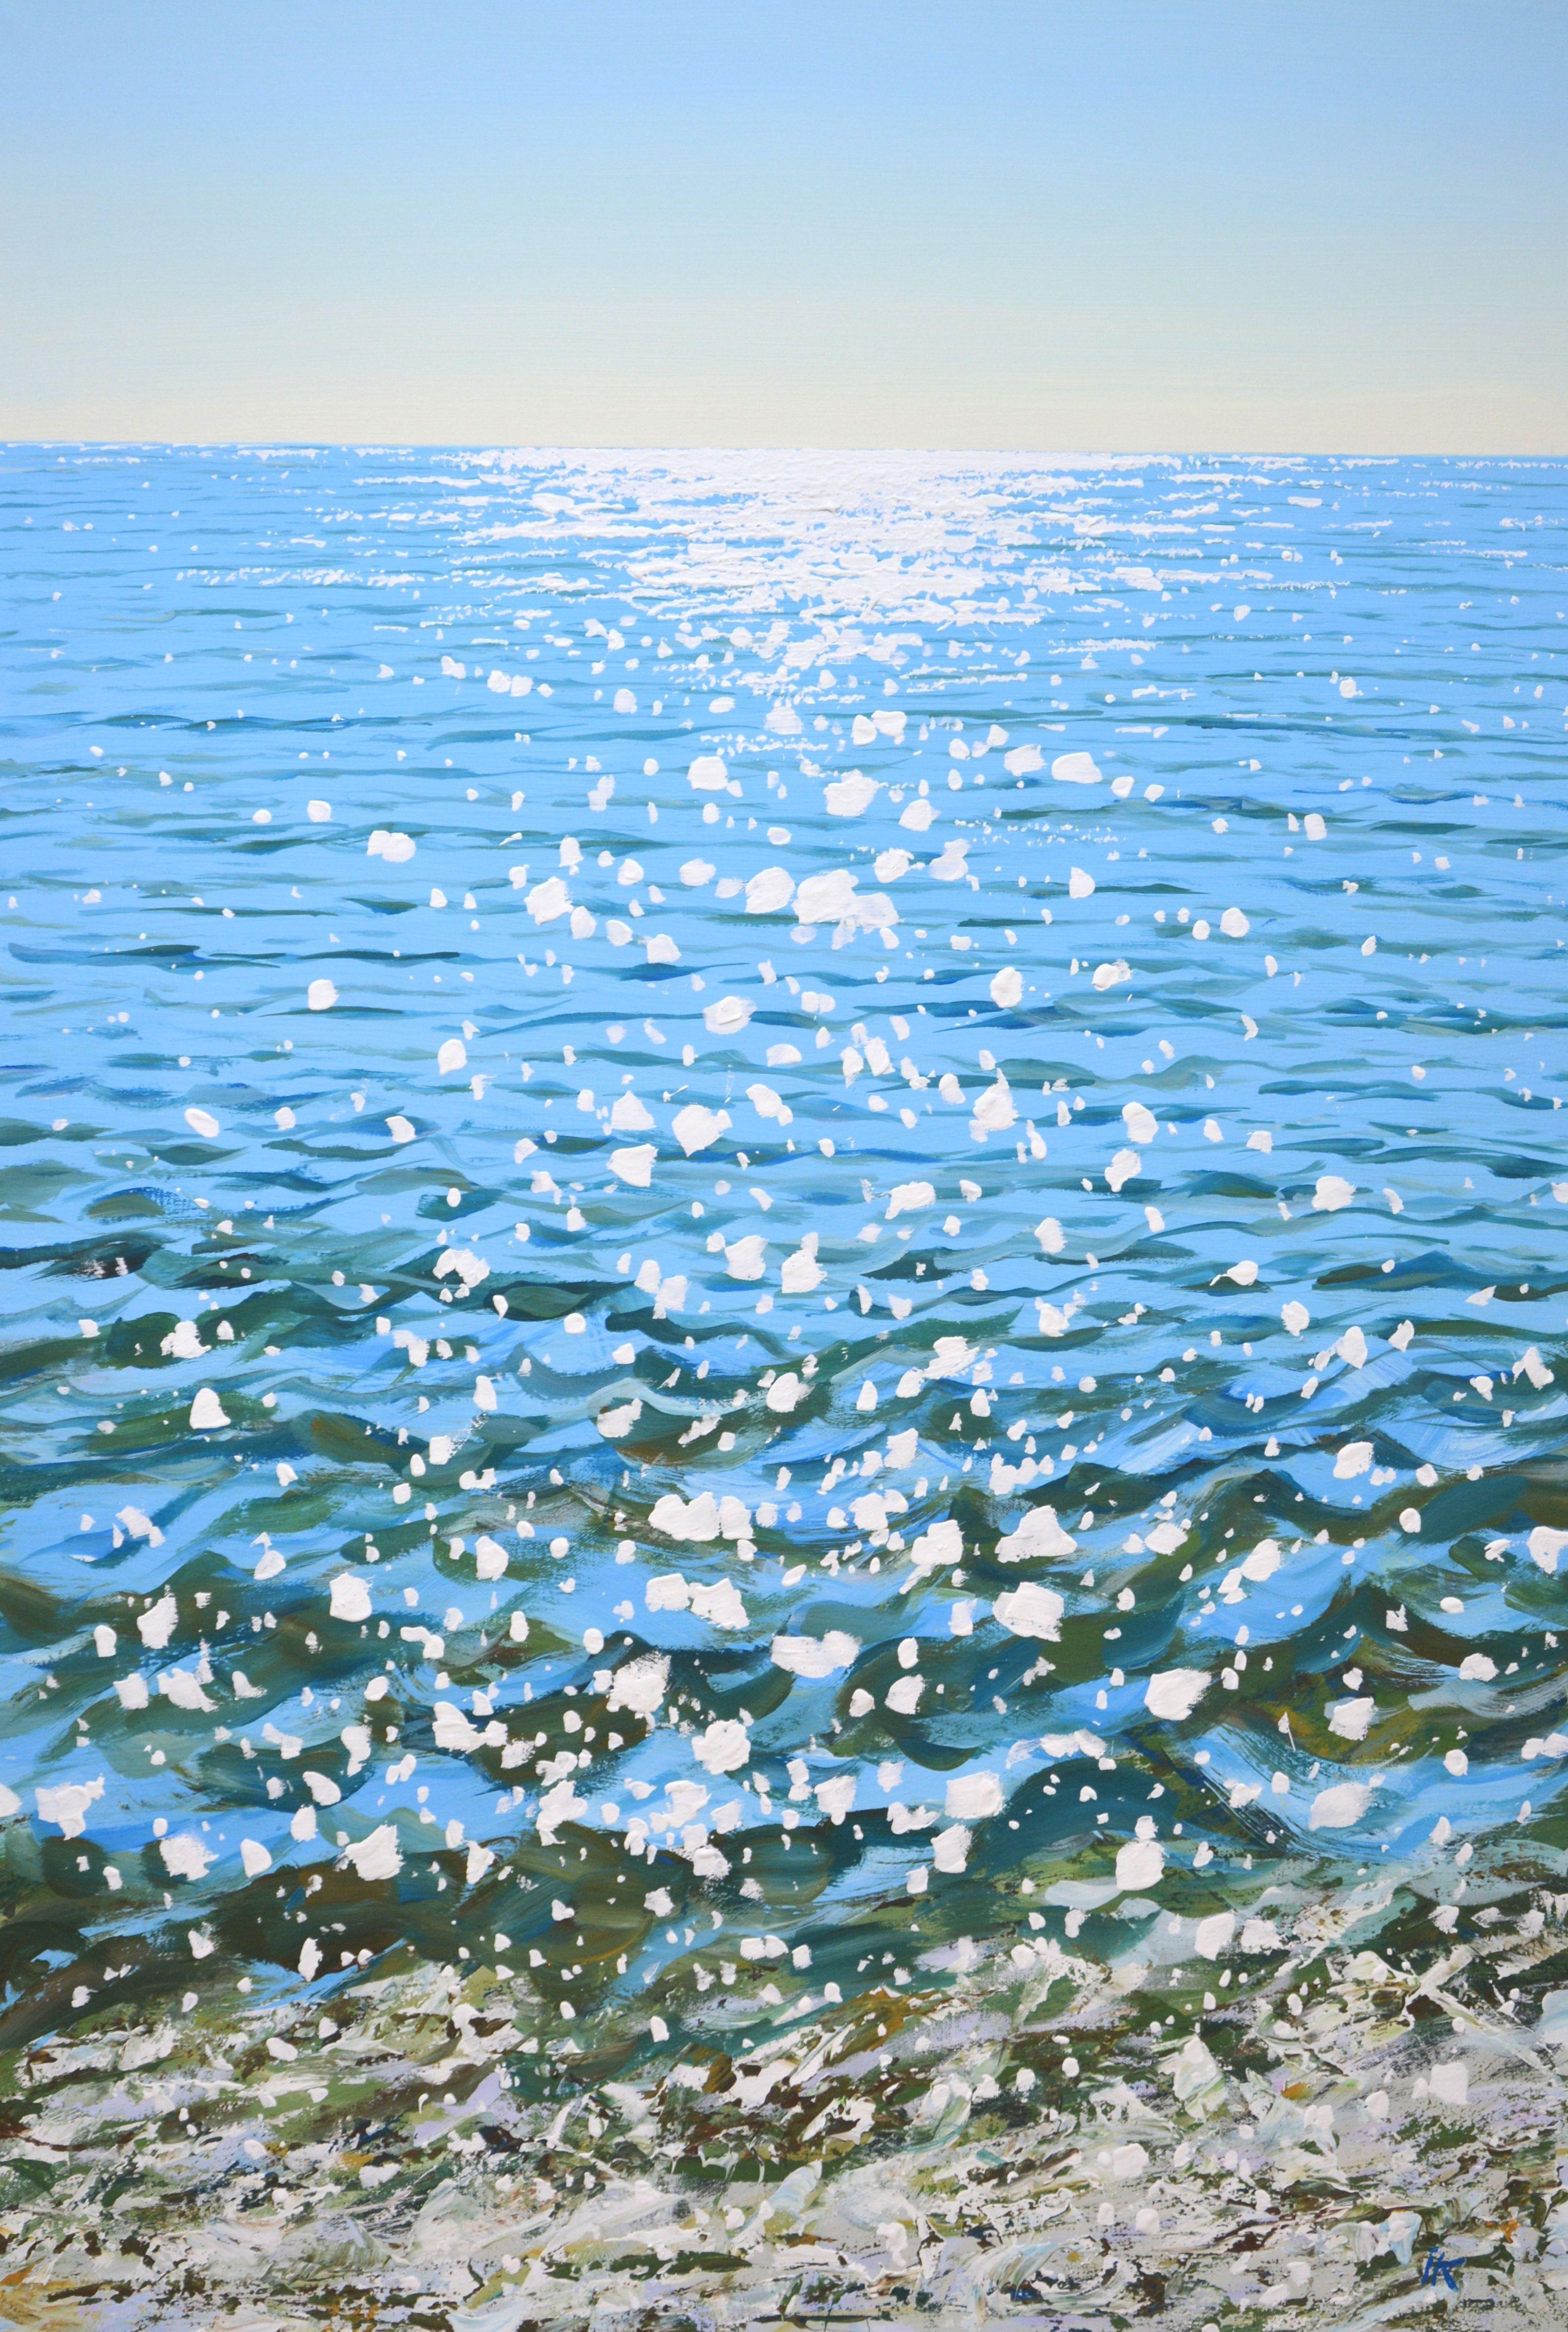 Blue water. Glare. The ocean, sparks of the sun on the water, clear skies, non-lash waves create an atmosphere of relaxation and romance. Made in the style of realism, light blue, white palette emphasizes the energy of water. Part of a permanent